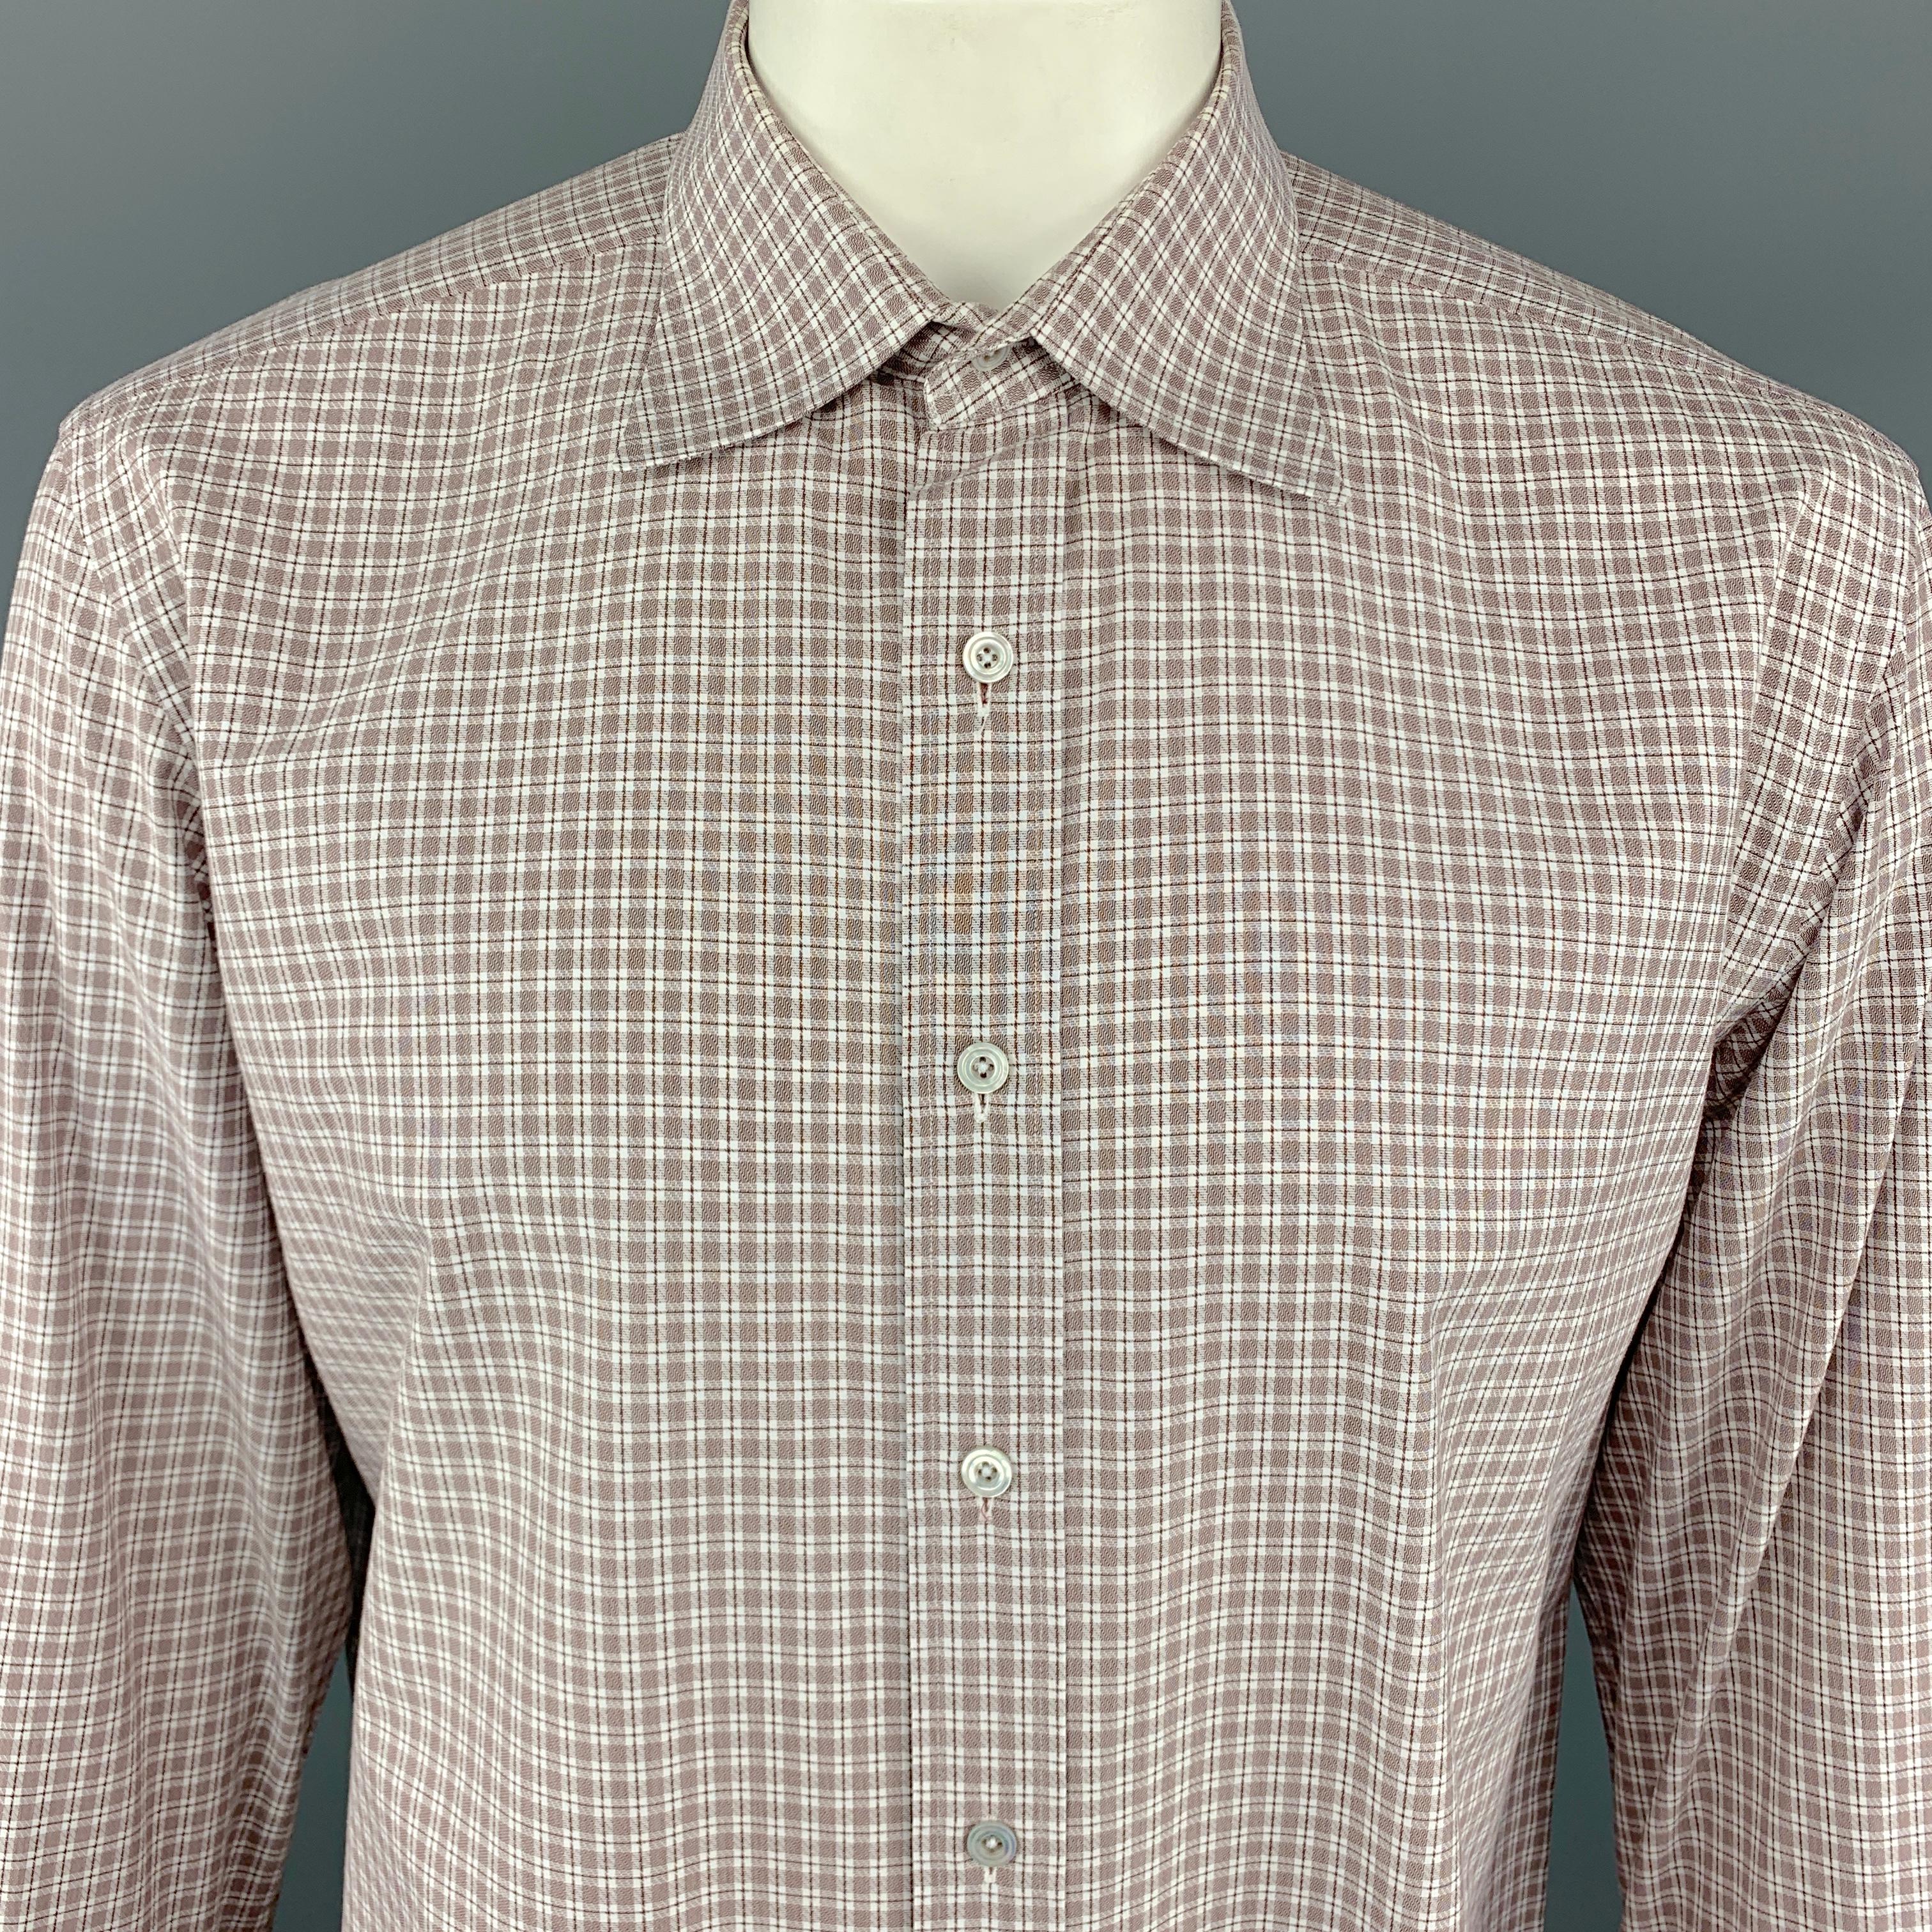 TOM FORD dress shirt comes in white and brown tones in a micro plaid cotton with a pointed spread collar, buttoned cuffs, and button up front. Made in Italy.

Excellent Pre-Owned Condition.
Marked: 44/17.5

Measurements:

Shoulder: 18.5 in.
Chest: